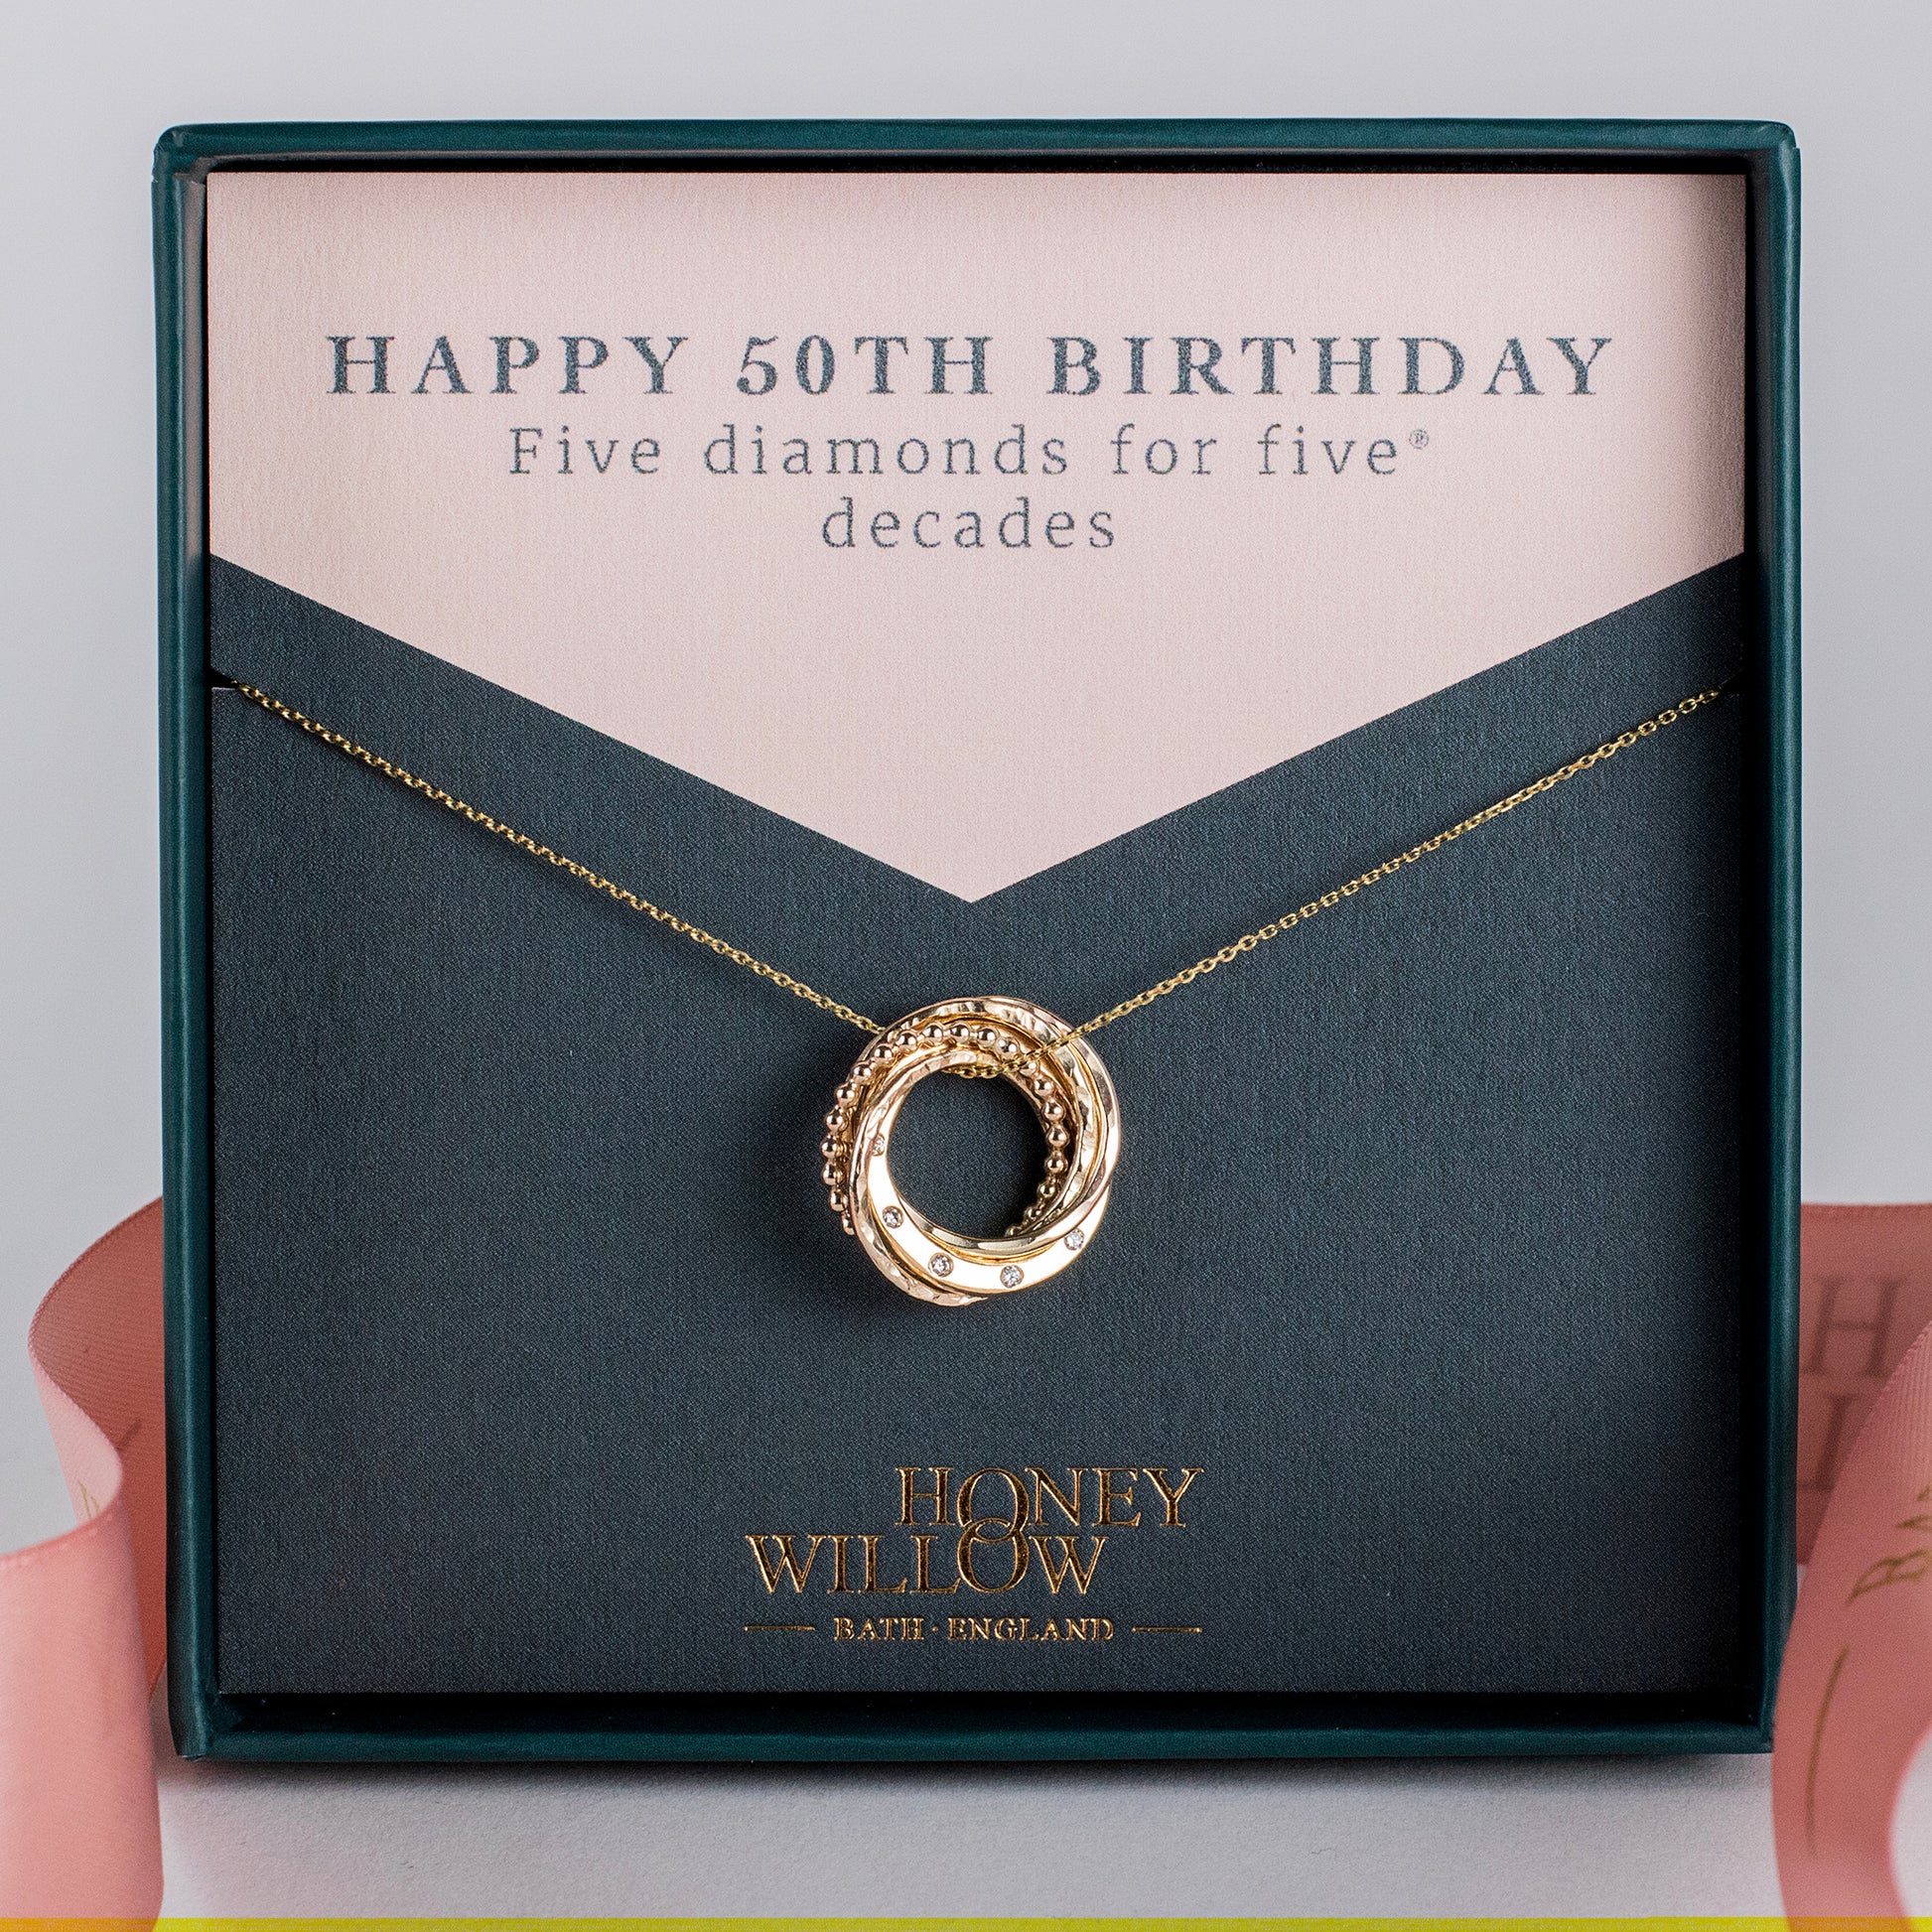 9kt 50th Birthday Necklace - 5 Diamonds for 5 Decades Necklace - Recycled Gold